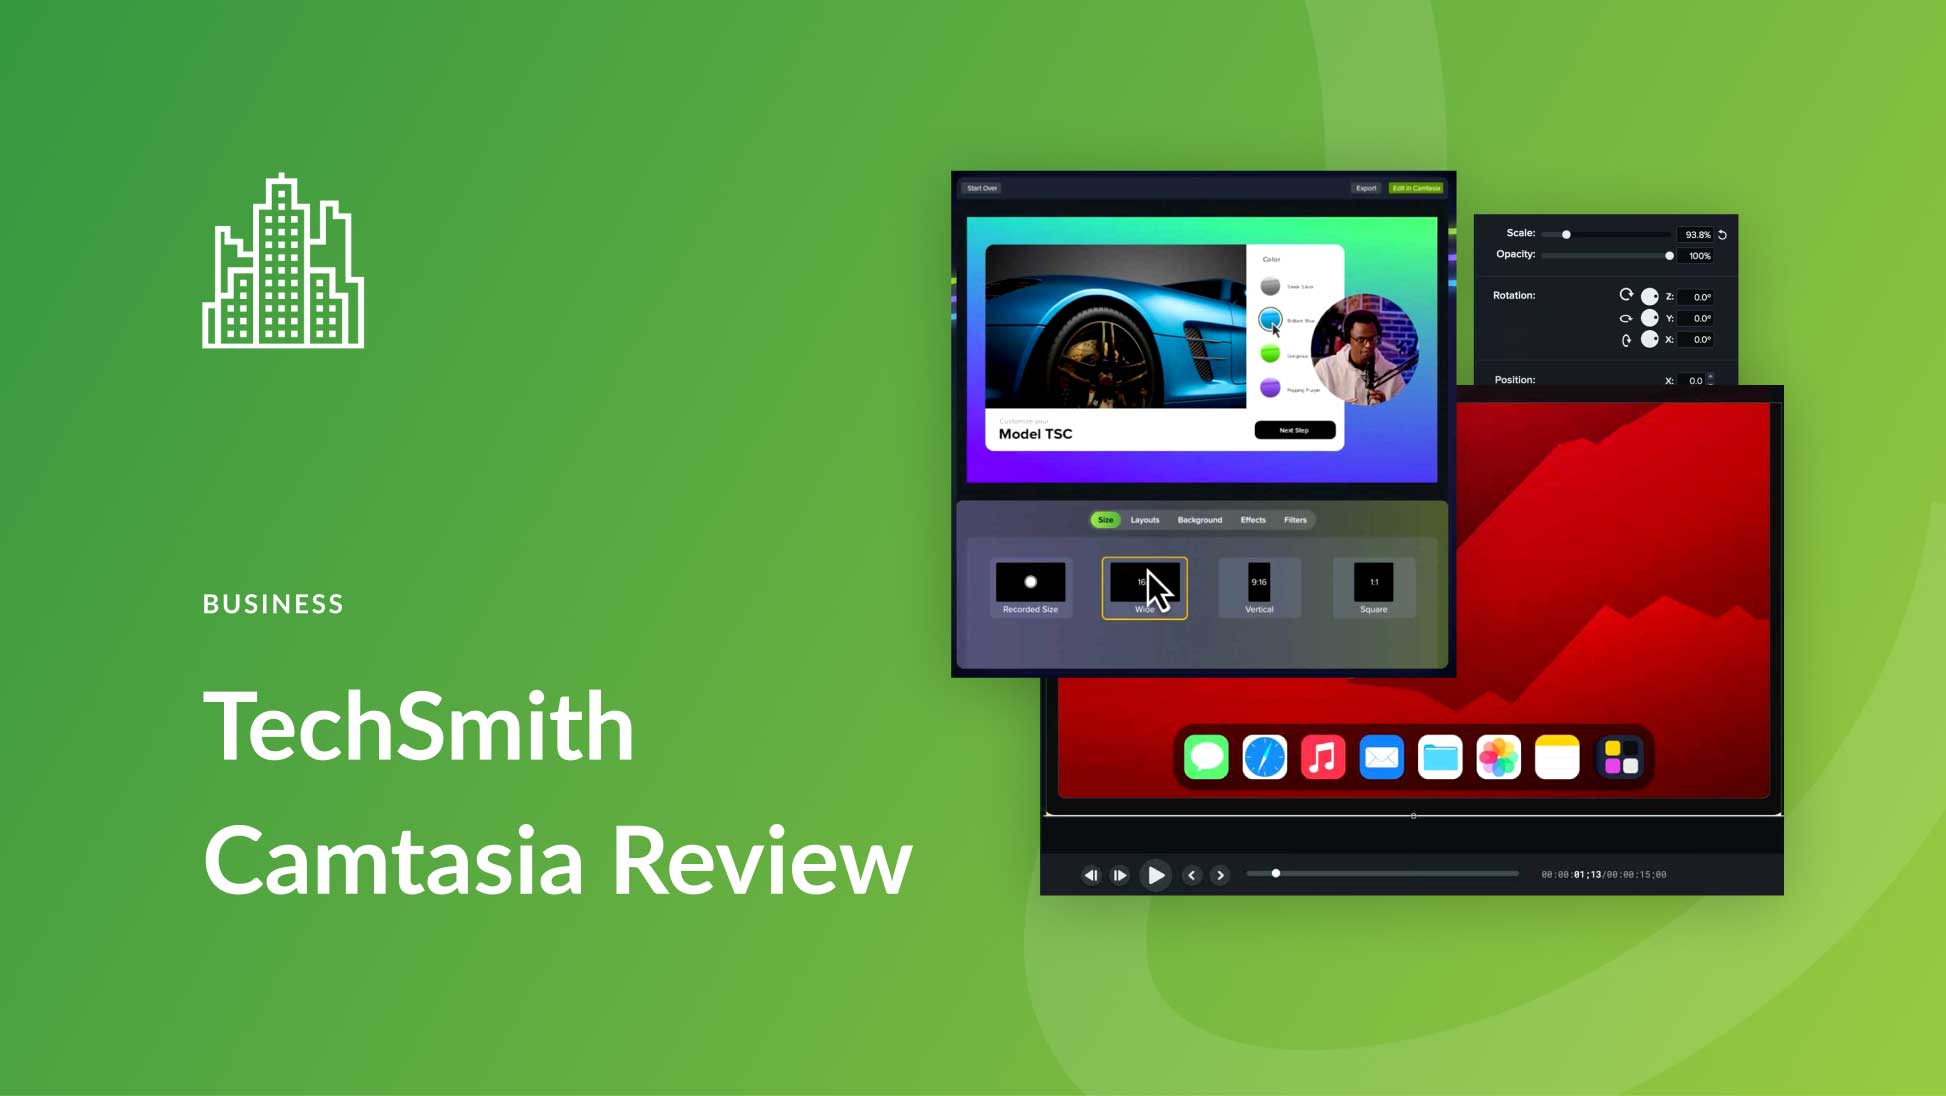 TechSmith Camtasia Review: Features, Pricing & More (2023)